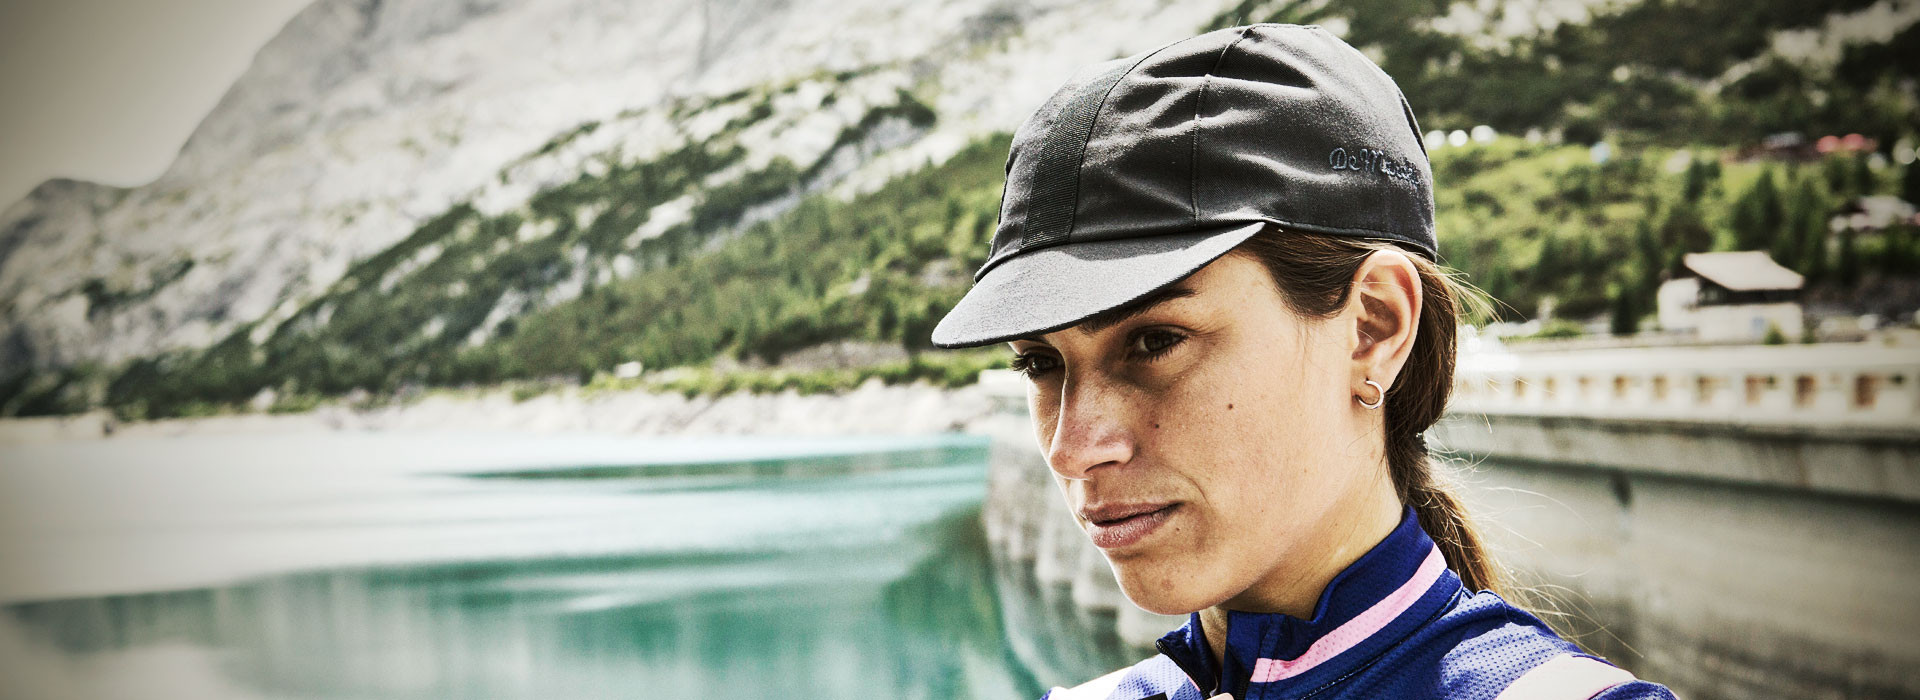 Demarchi - Women's Cycling Accessories